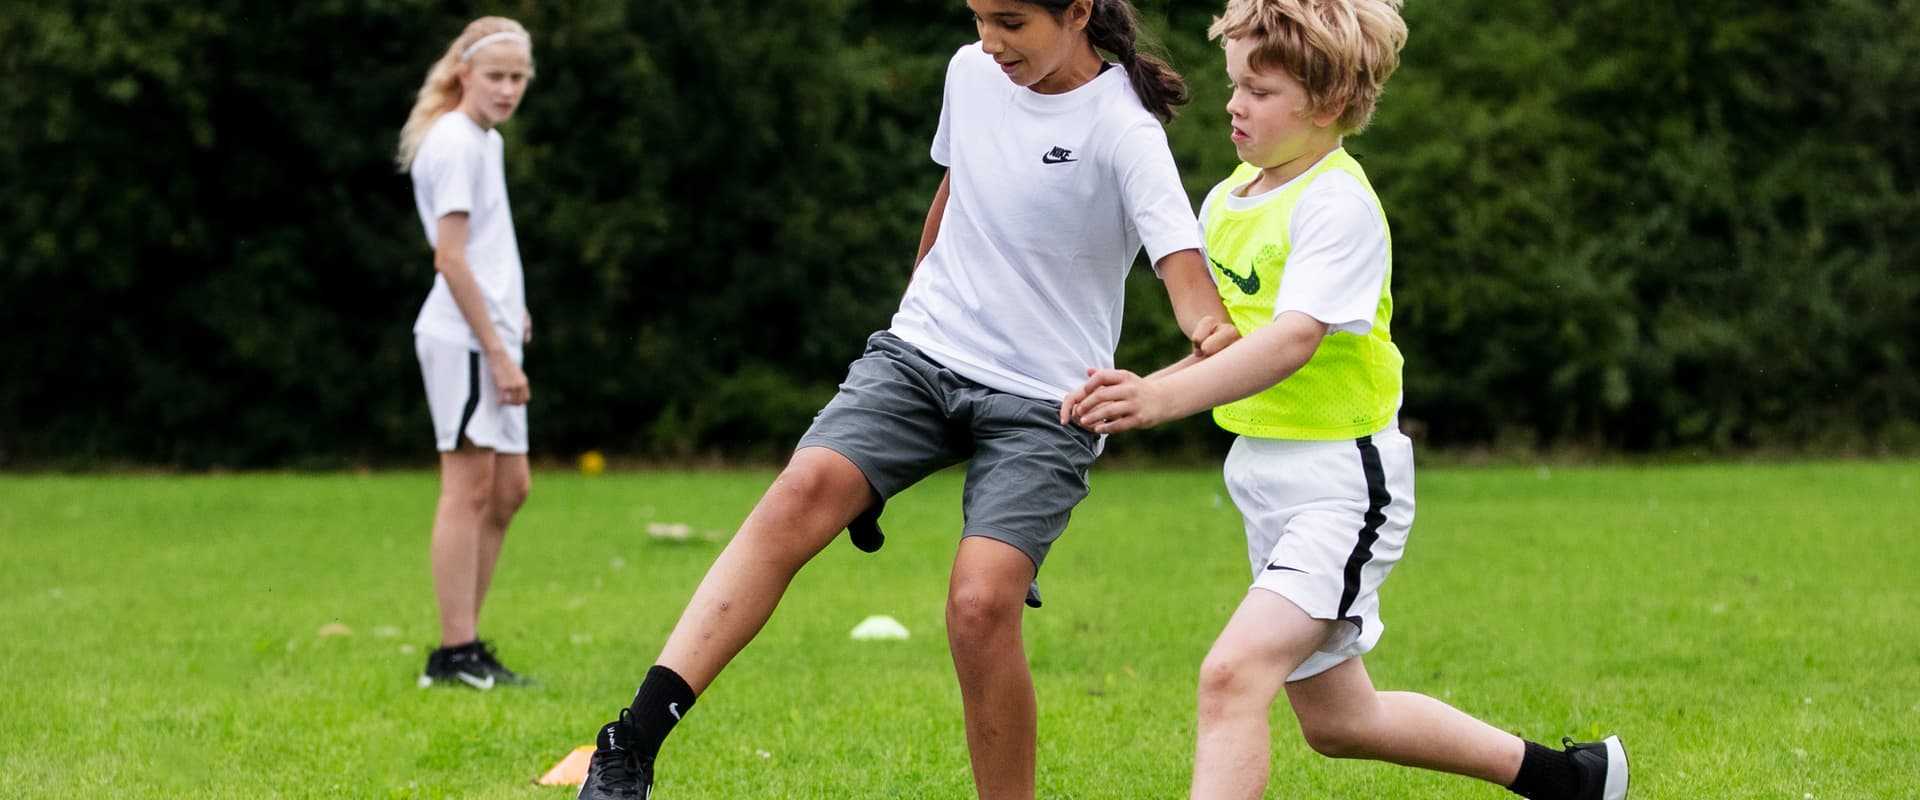 Re-thinking Football for Young People